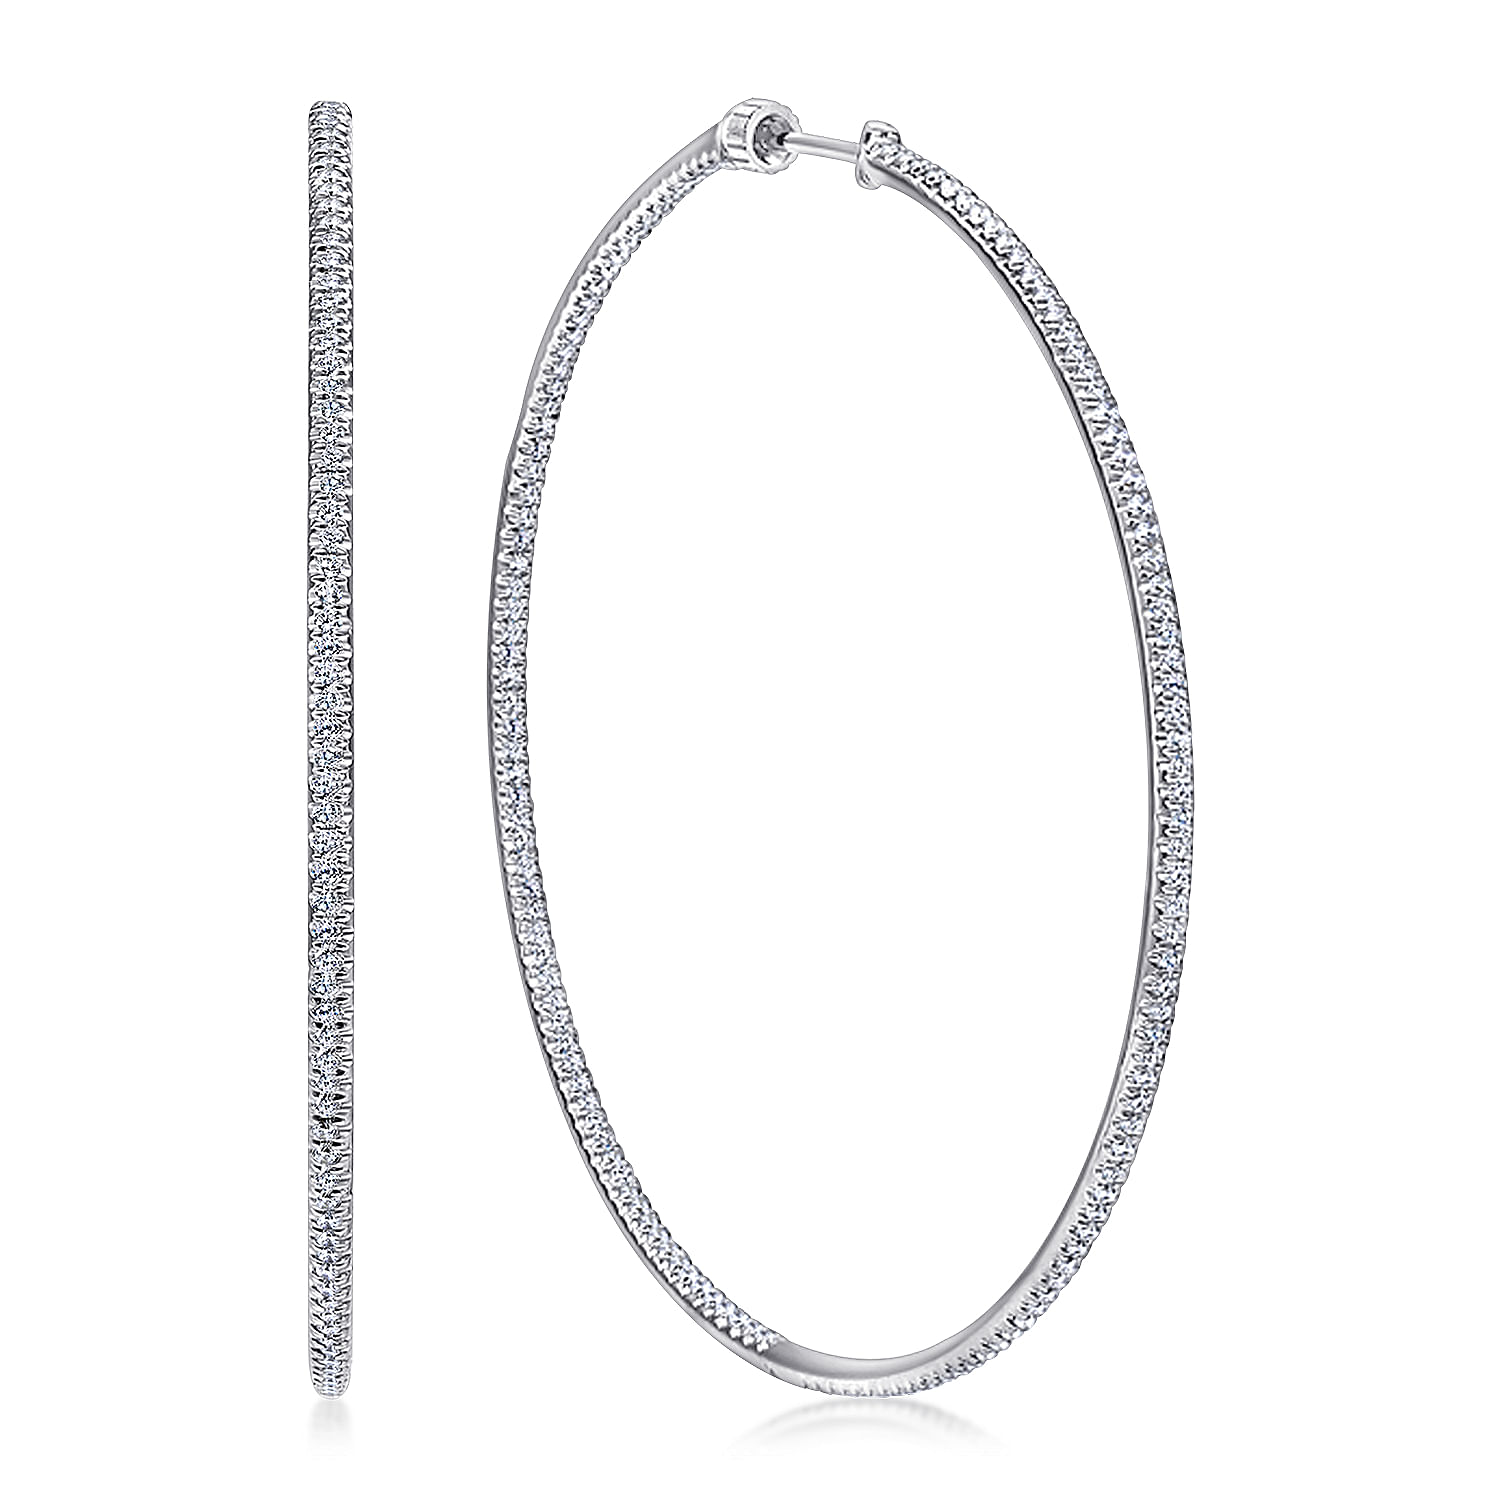 14K White Gold Micro Pave 65mm Round Inside Out Diamond Hoop Earrings